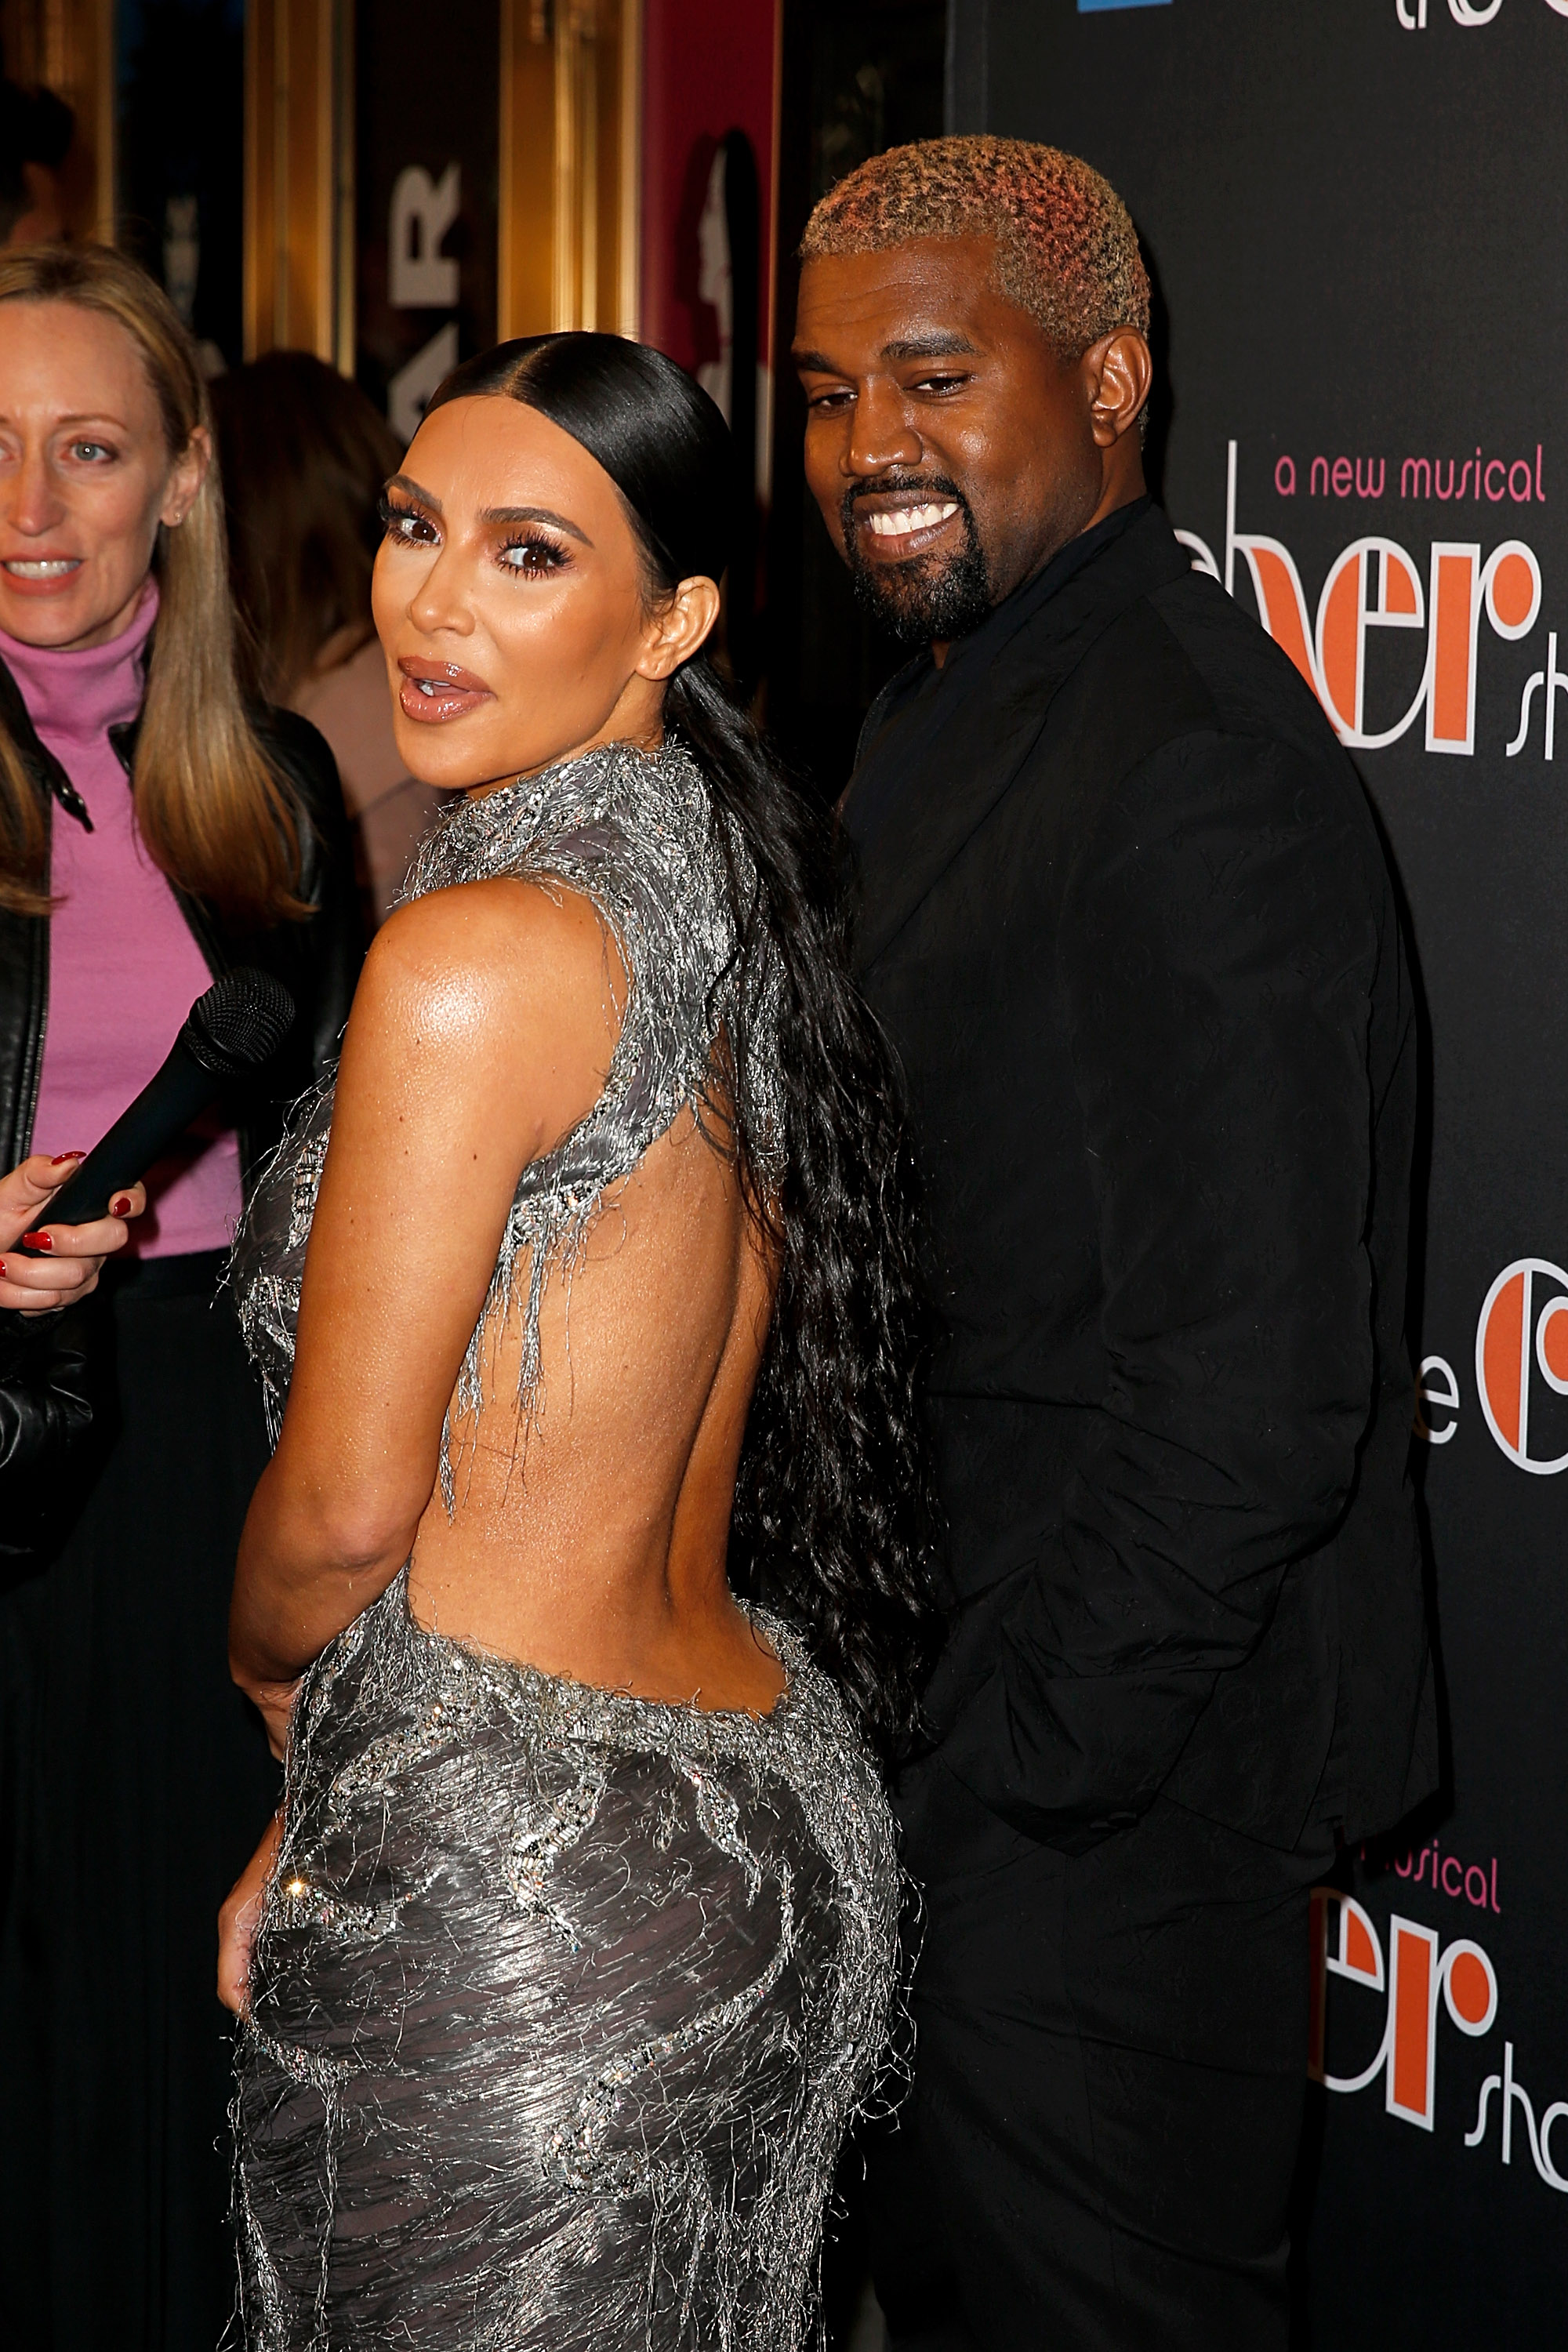 Kanye West and Kim Kardashian West on December 03, 2018 in New York City. | Source: Getty Images